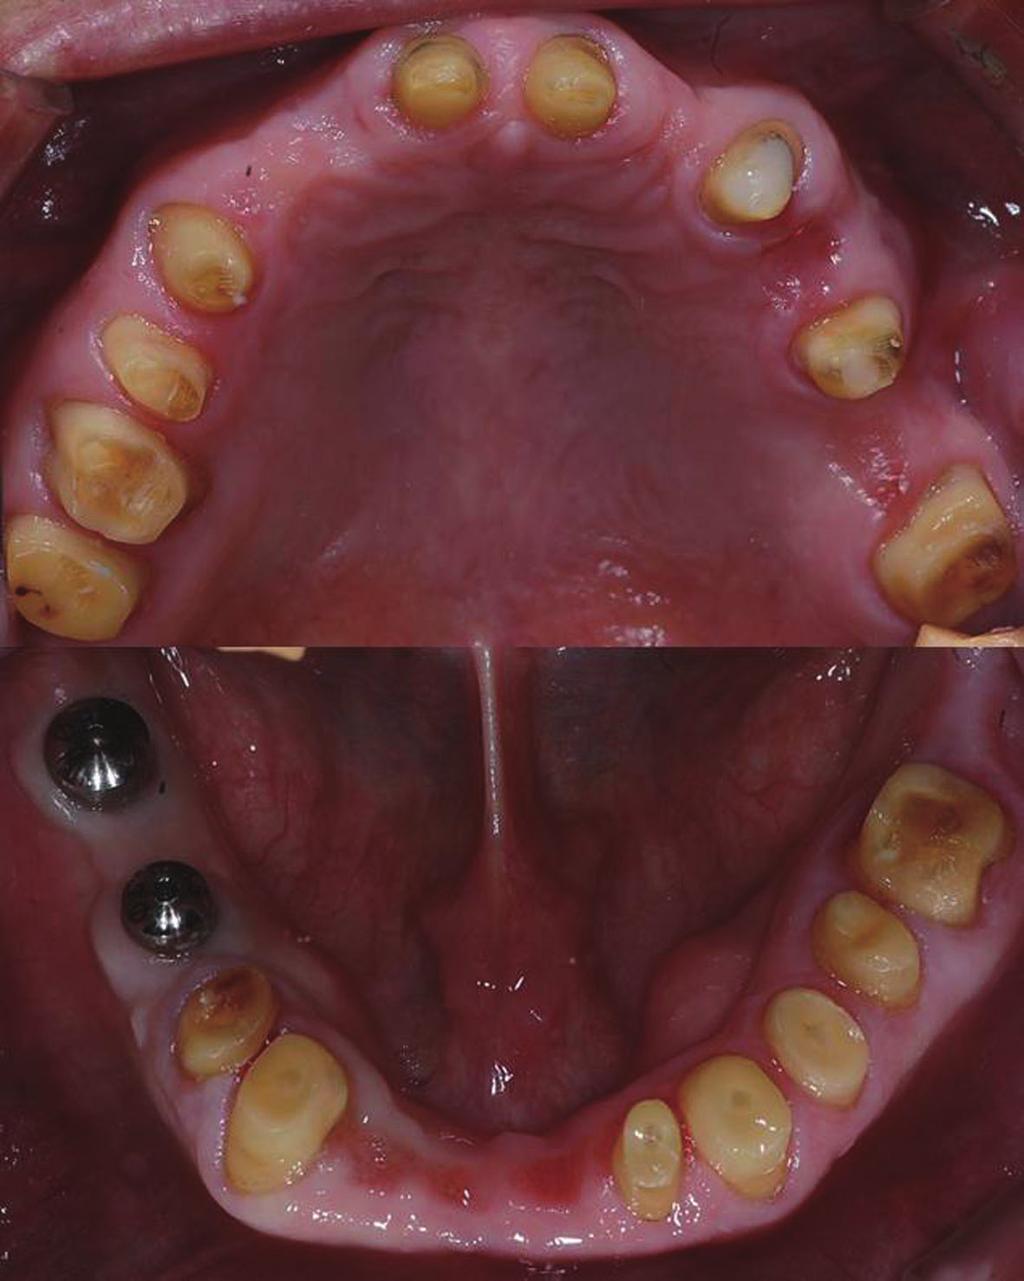 Application of ARCUS digma I, II systems for full mouth reconstruction: a case report provide adequate posterior disclusion.